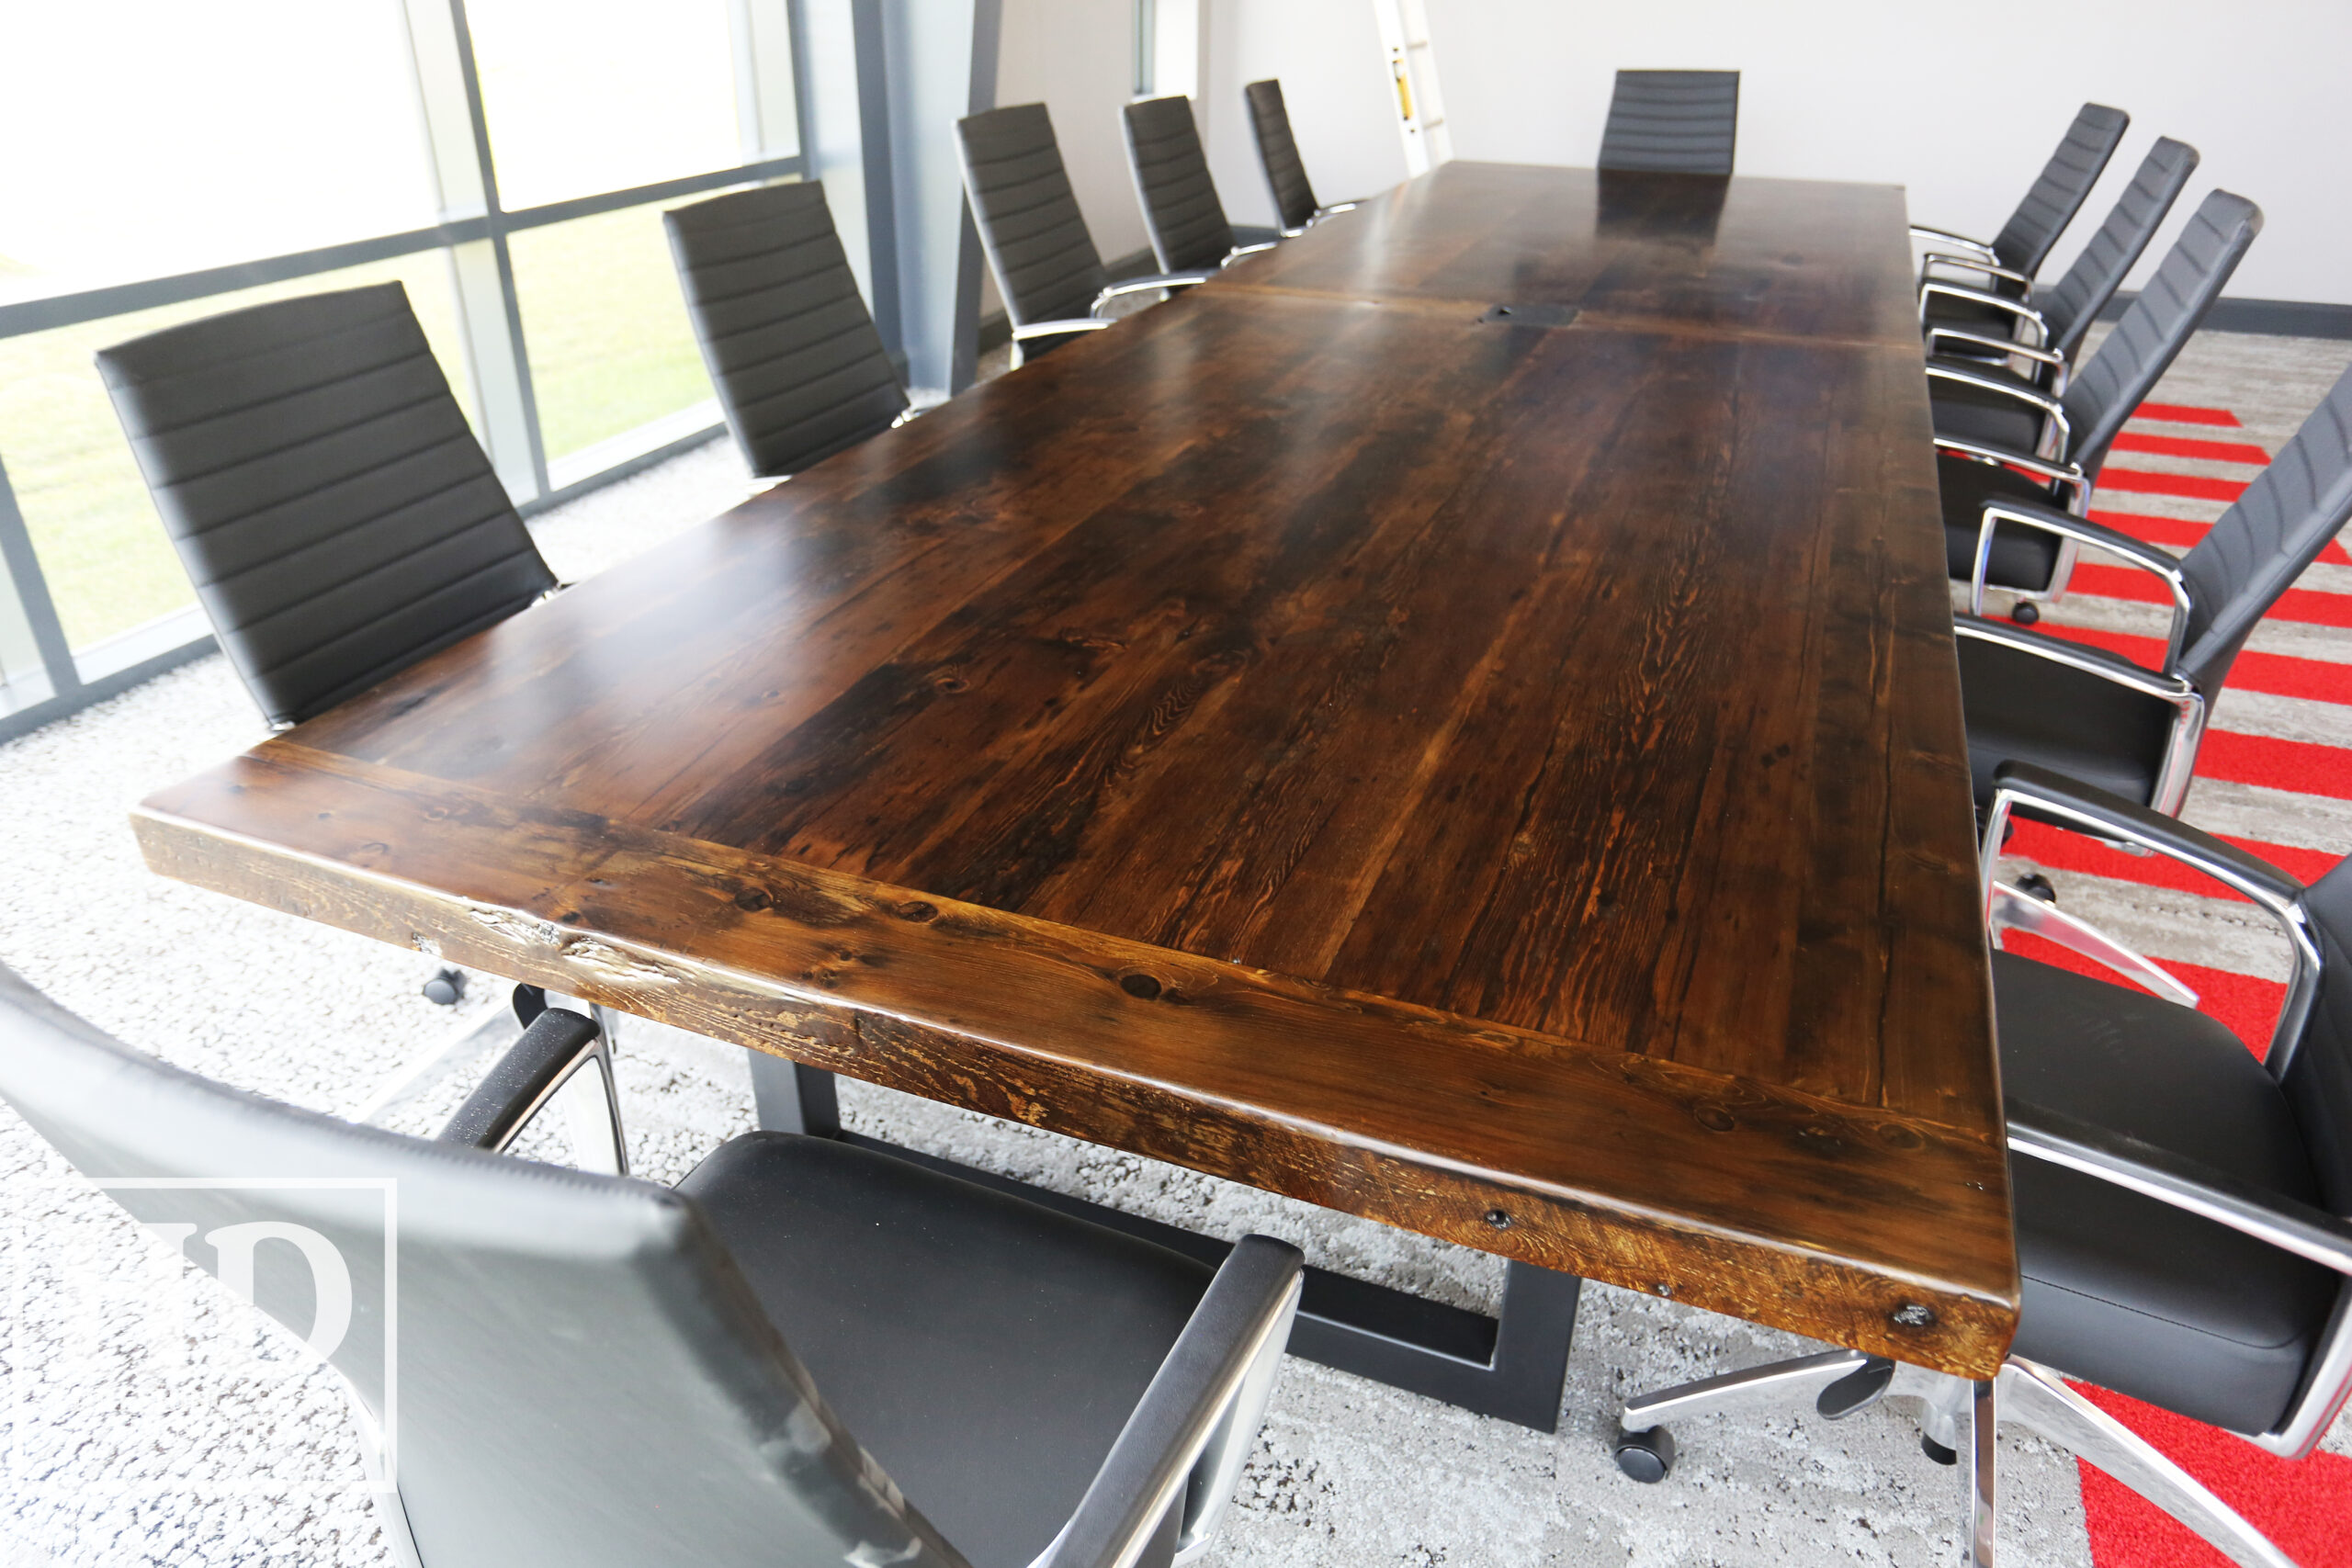 Project details: 17' Ontario Barnwood Boardroom Wood Table we made for a Beamsville, Ontario company - 60" wide – Steel U Shaped Base – Reclaimed Old Growth Hemlock Threshing Floor Construction – Black Stain Option – Centre on-site doweling - Original edges & distressing maintained – Premium epoxy + Satin polyurethane finish  – www.table.ca